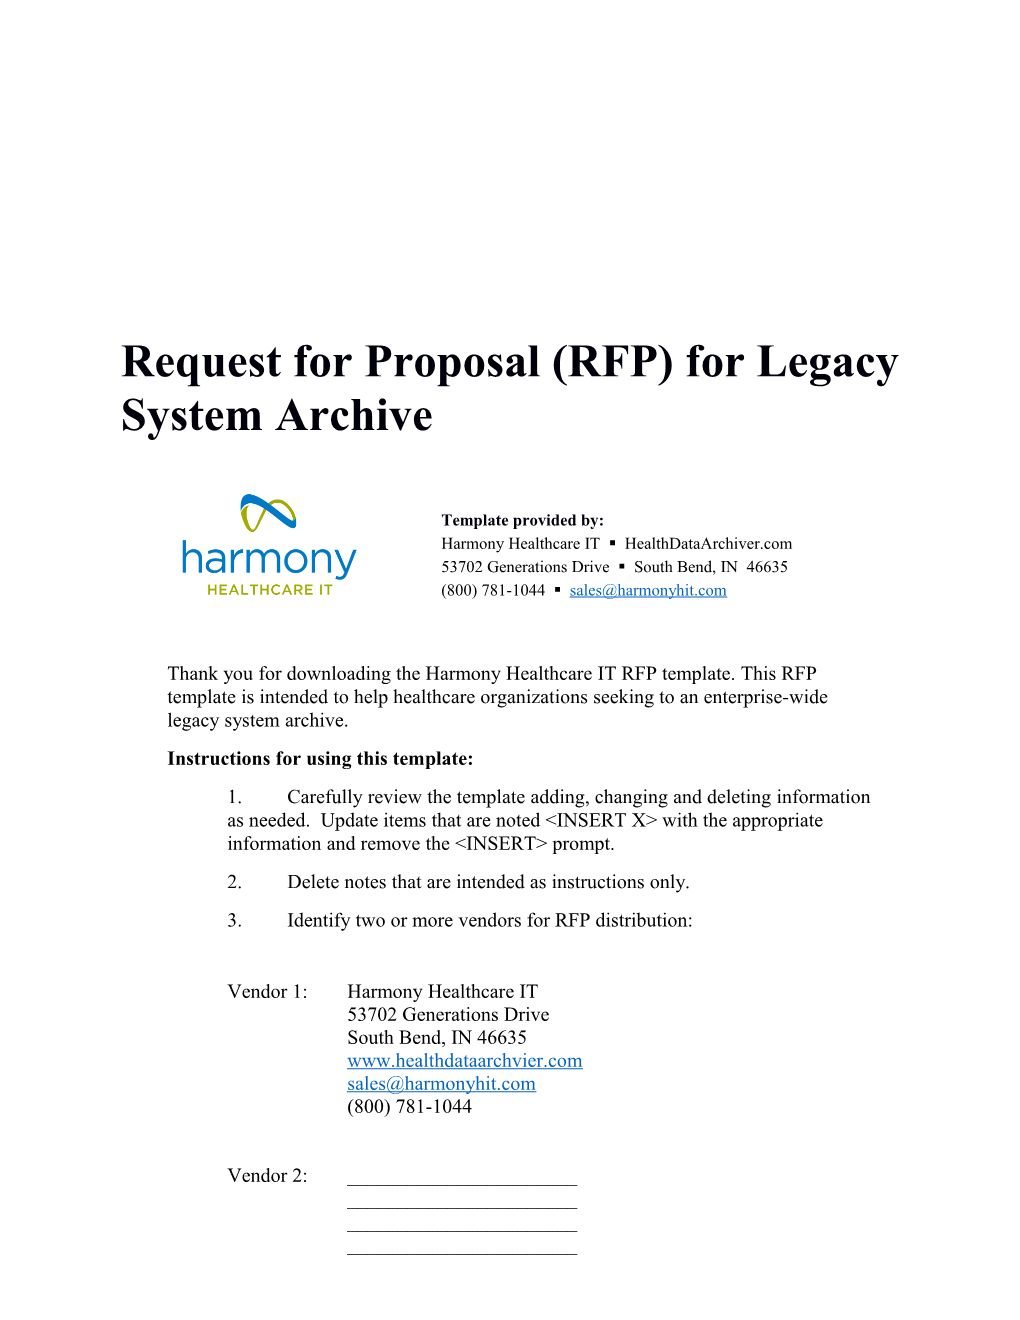 Request for Proposal (RFP) for Legacy System Archive